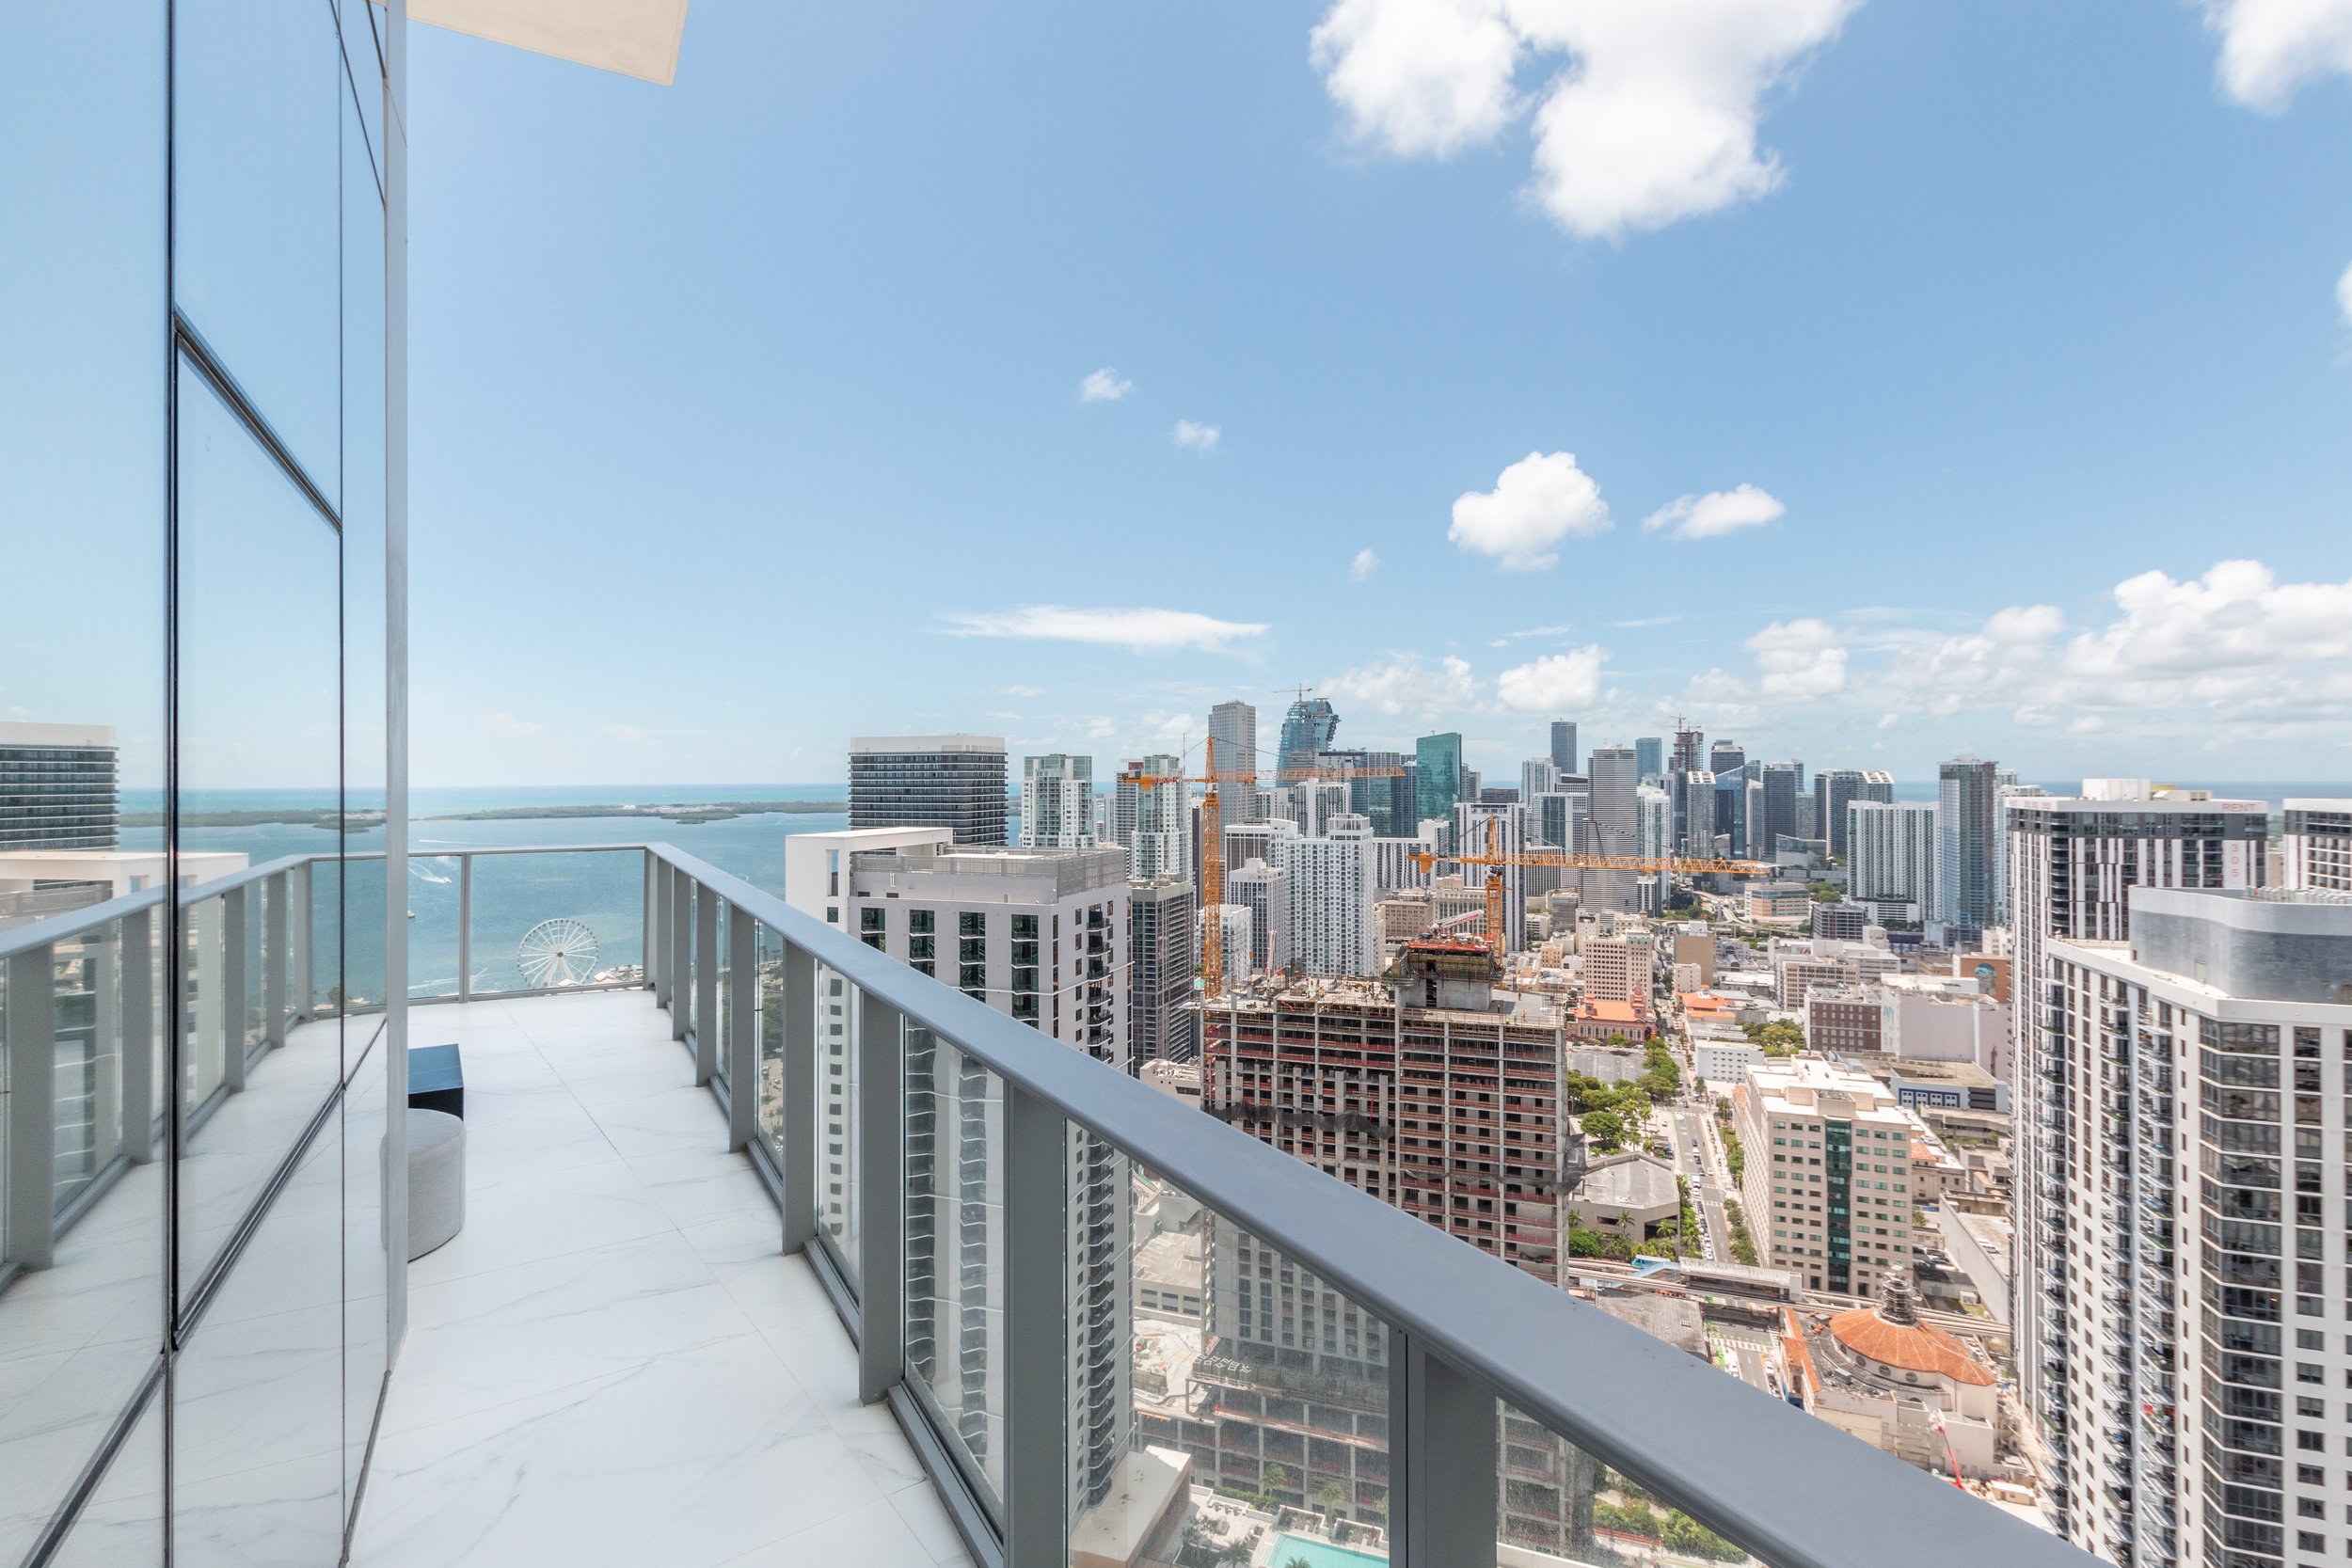 Step Inside A Sky-High Ultra-Luxe Penthouse At PARAMOUNT Miami Worldcenter For Rent Asking $40K Per Month ALTARA Properties Scott Lawrence Porter 1.31.jpg